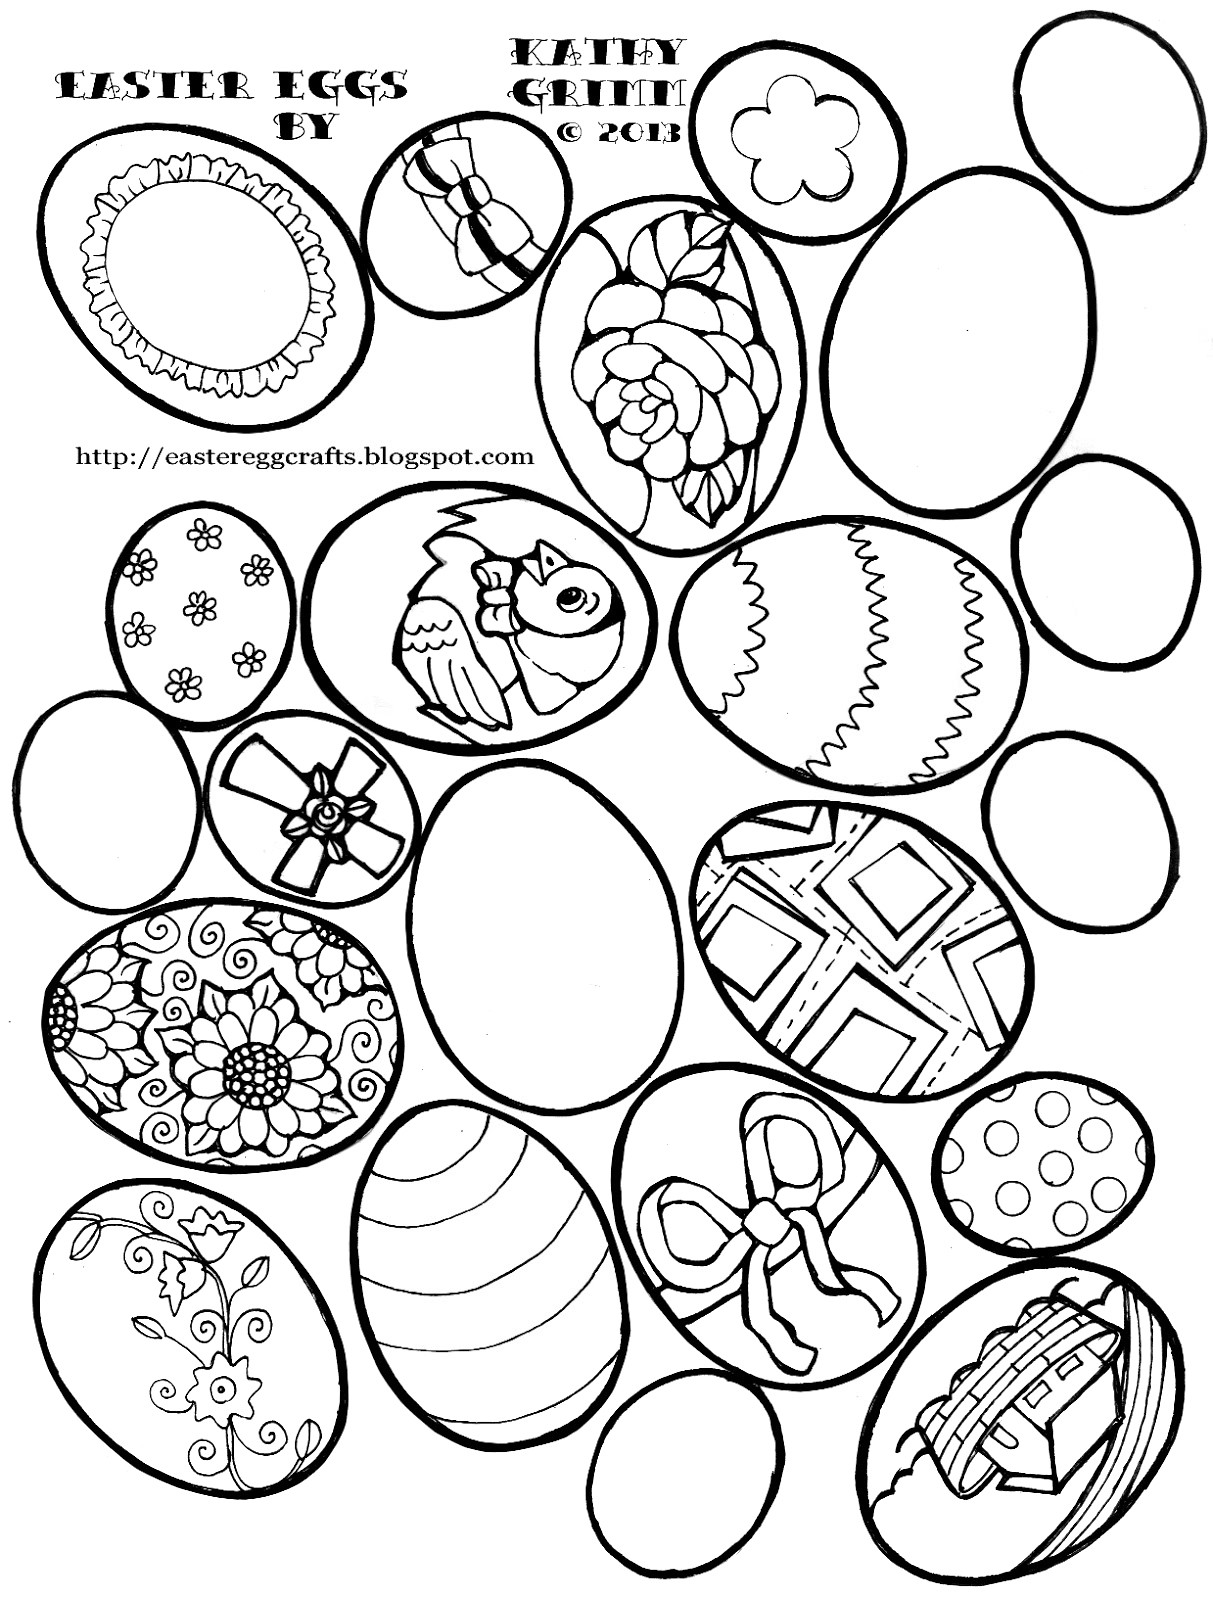 Coloring Easter Egg Ideas
 Easter Egg Coloring Pages vintage eggs